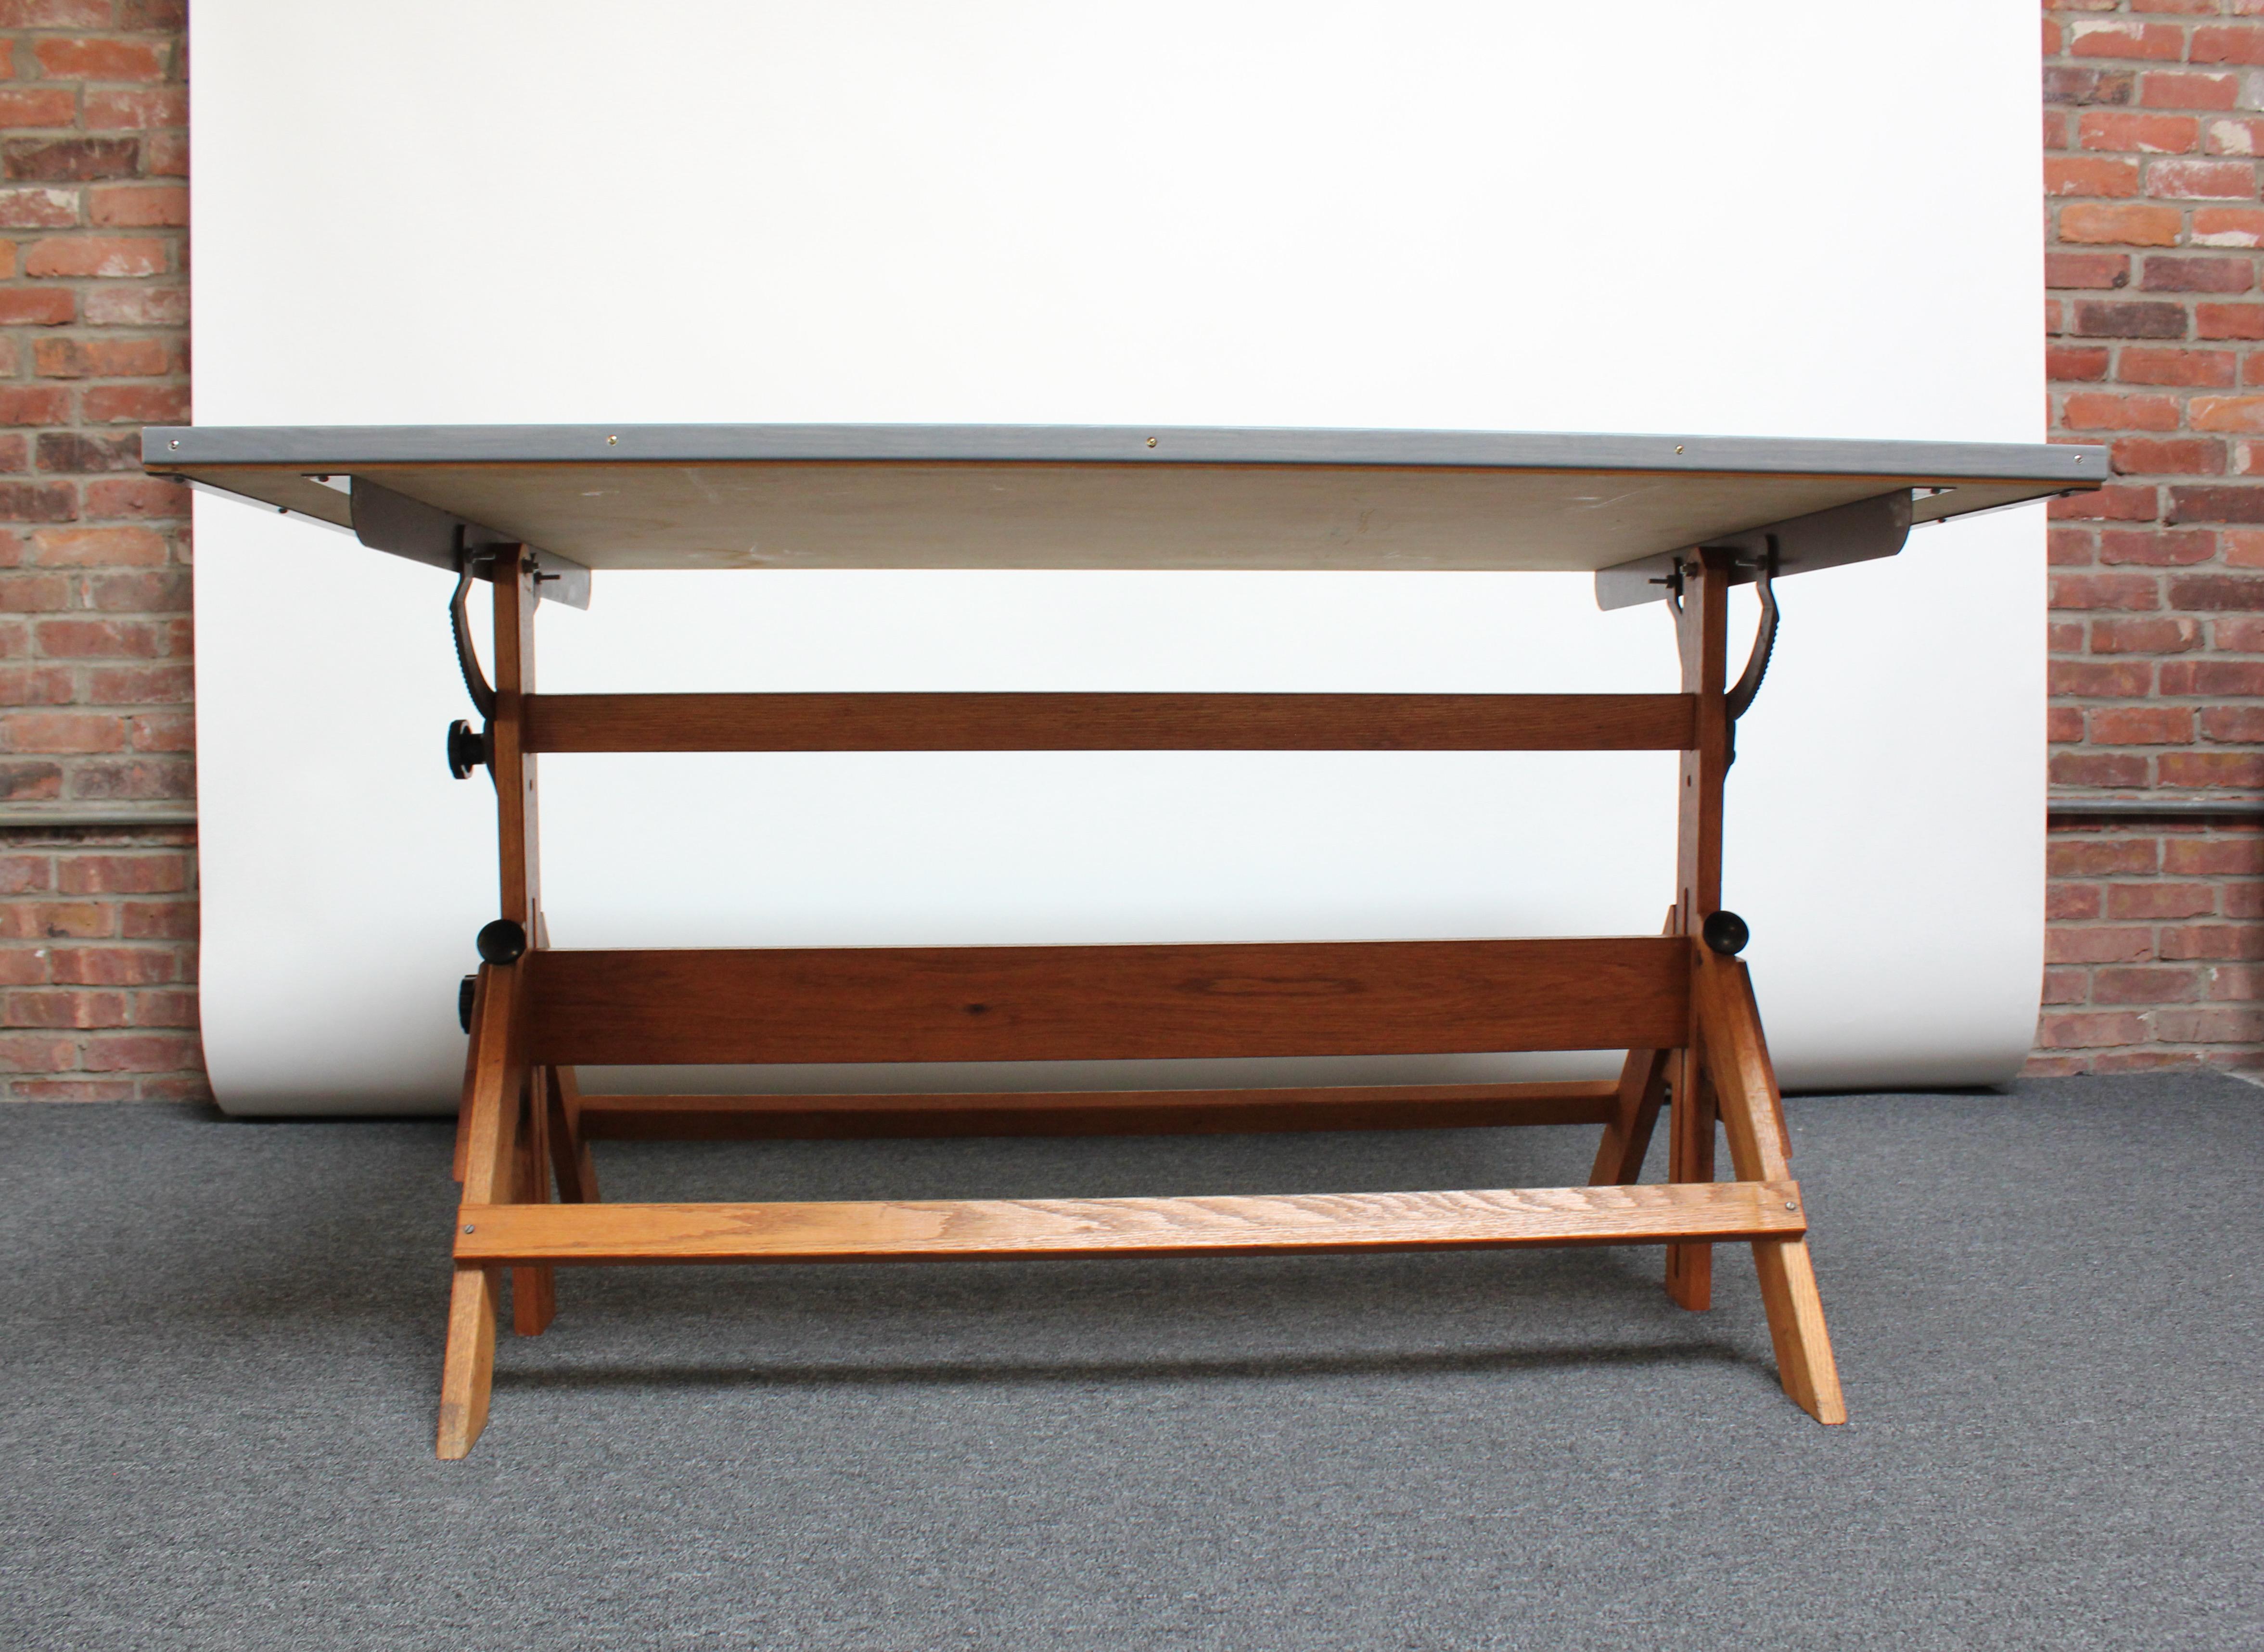 Large drafting table (ca. 1950s, USA) composed of a maple surface with gray and brown painted trim supported by an oak base. 
Surface has been refinished; light wear remains as shown to the surface and border (few scuffs). There are also a few